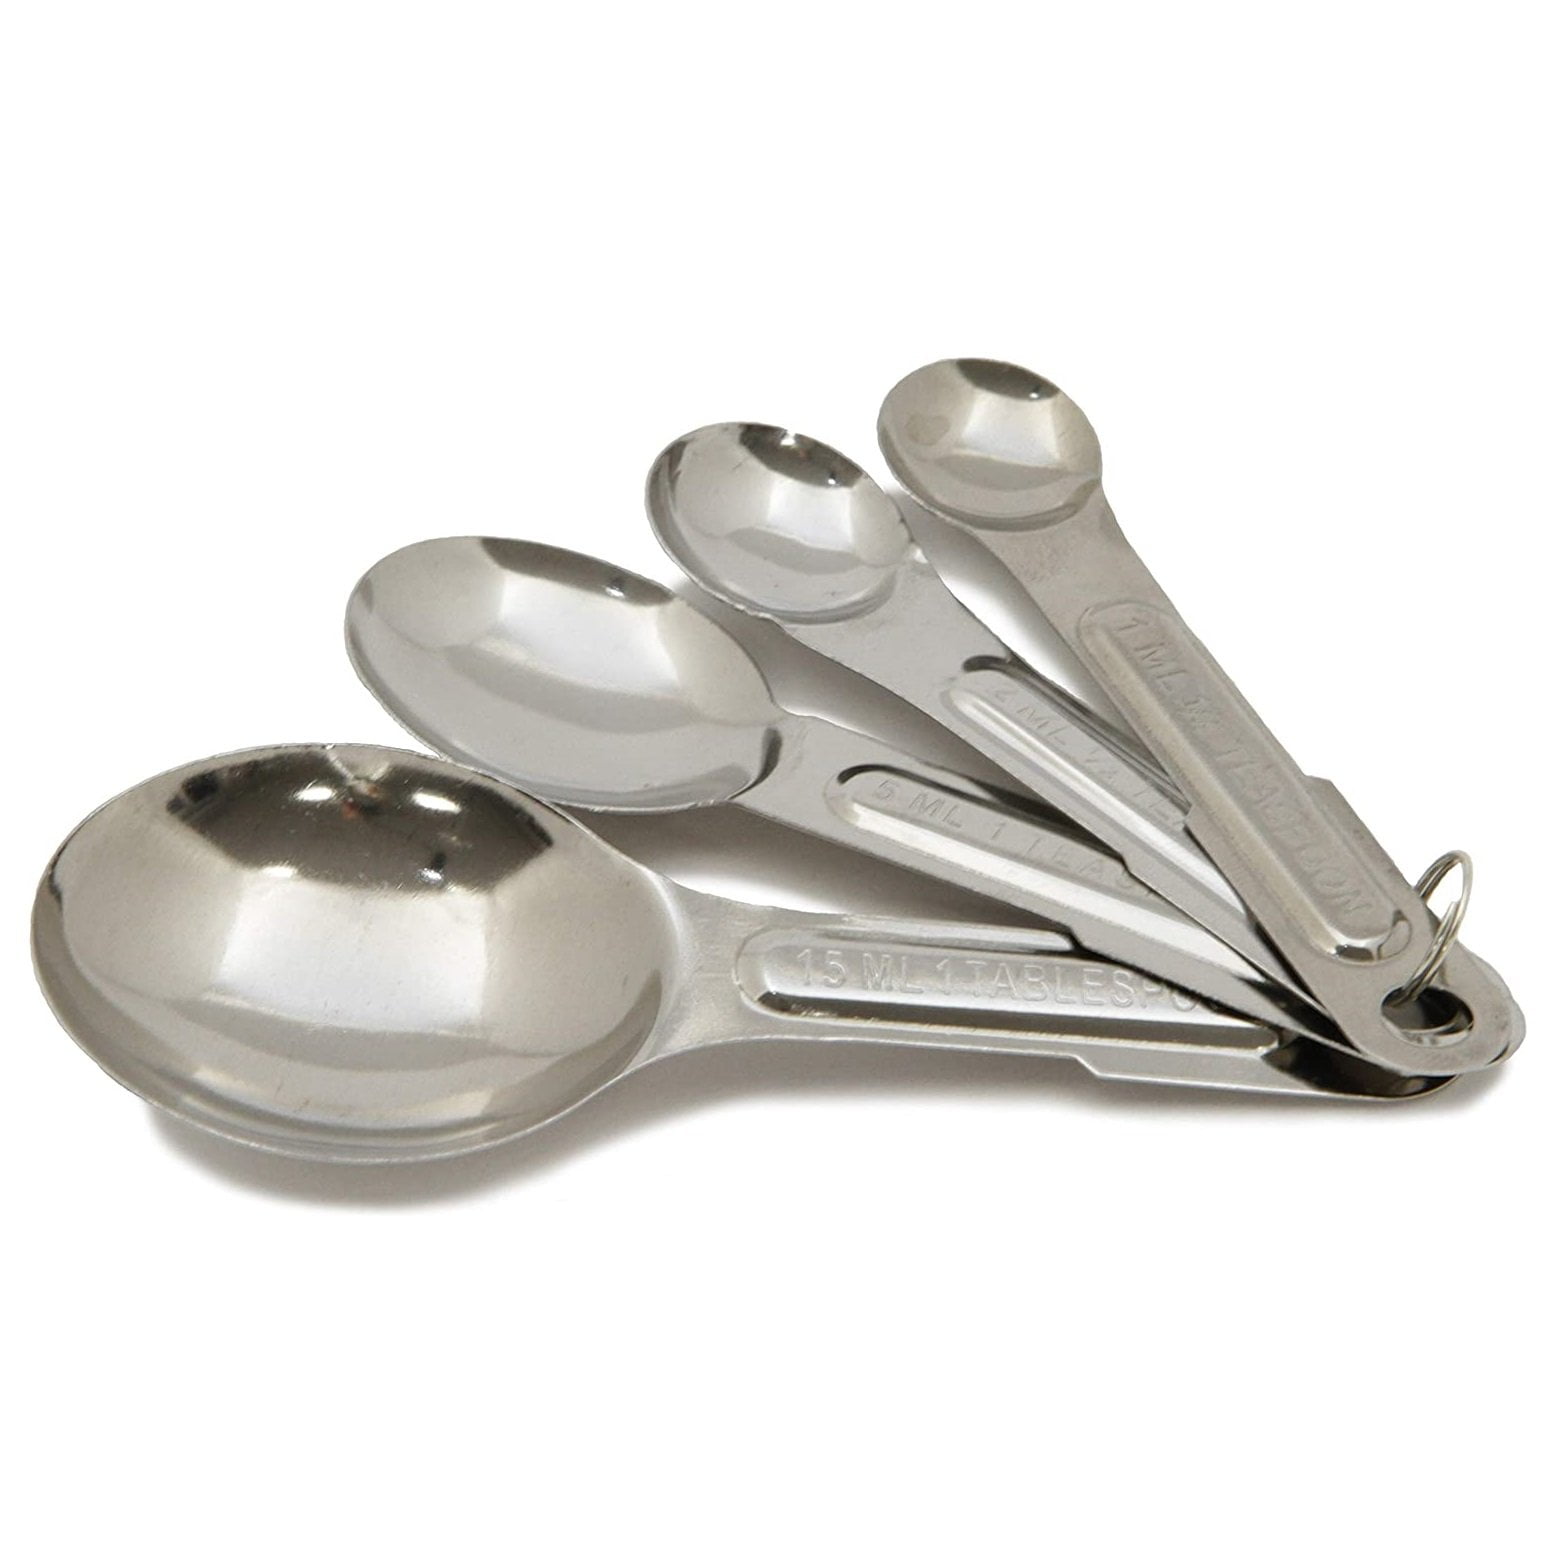 CuttleLab Measuring Cups and Measuring Spoons Set of 14 - Stainless Steel Measuring Cups and Spoons Set, Includes 1/8 Teaspoon Measuring Spoon, 1/8